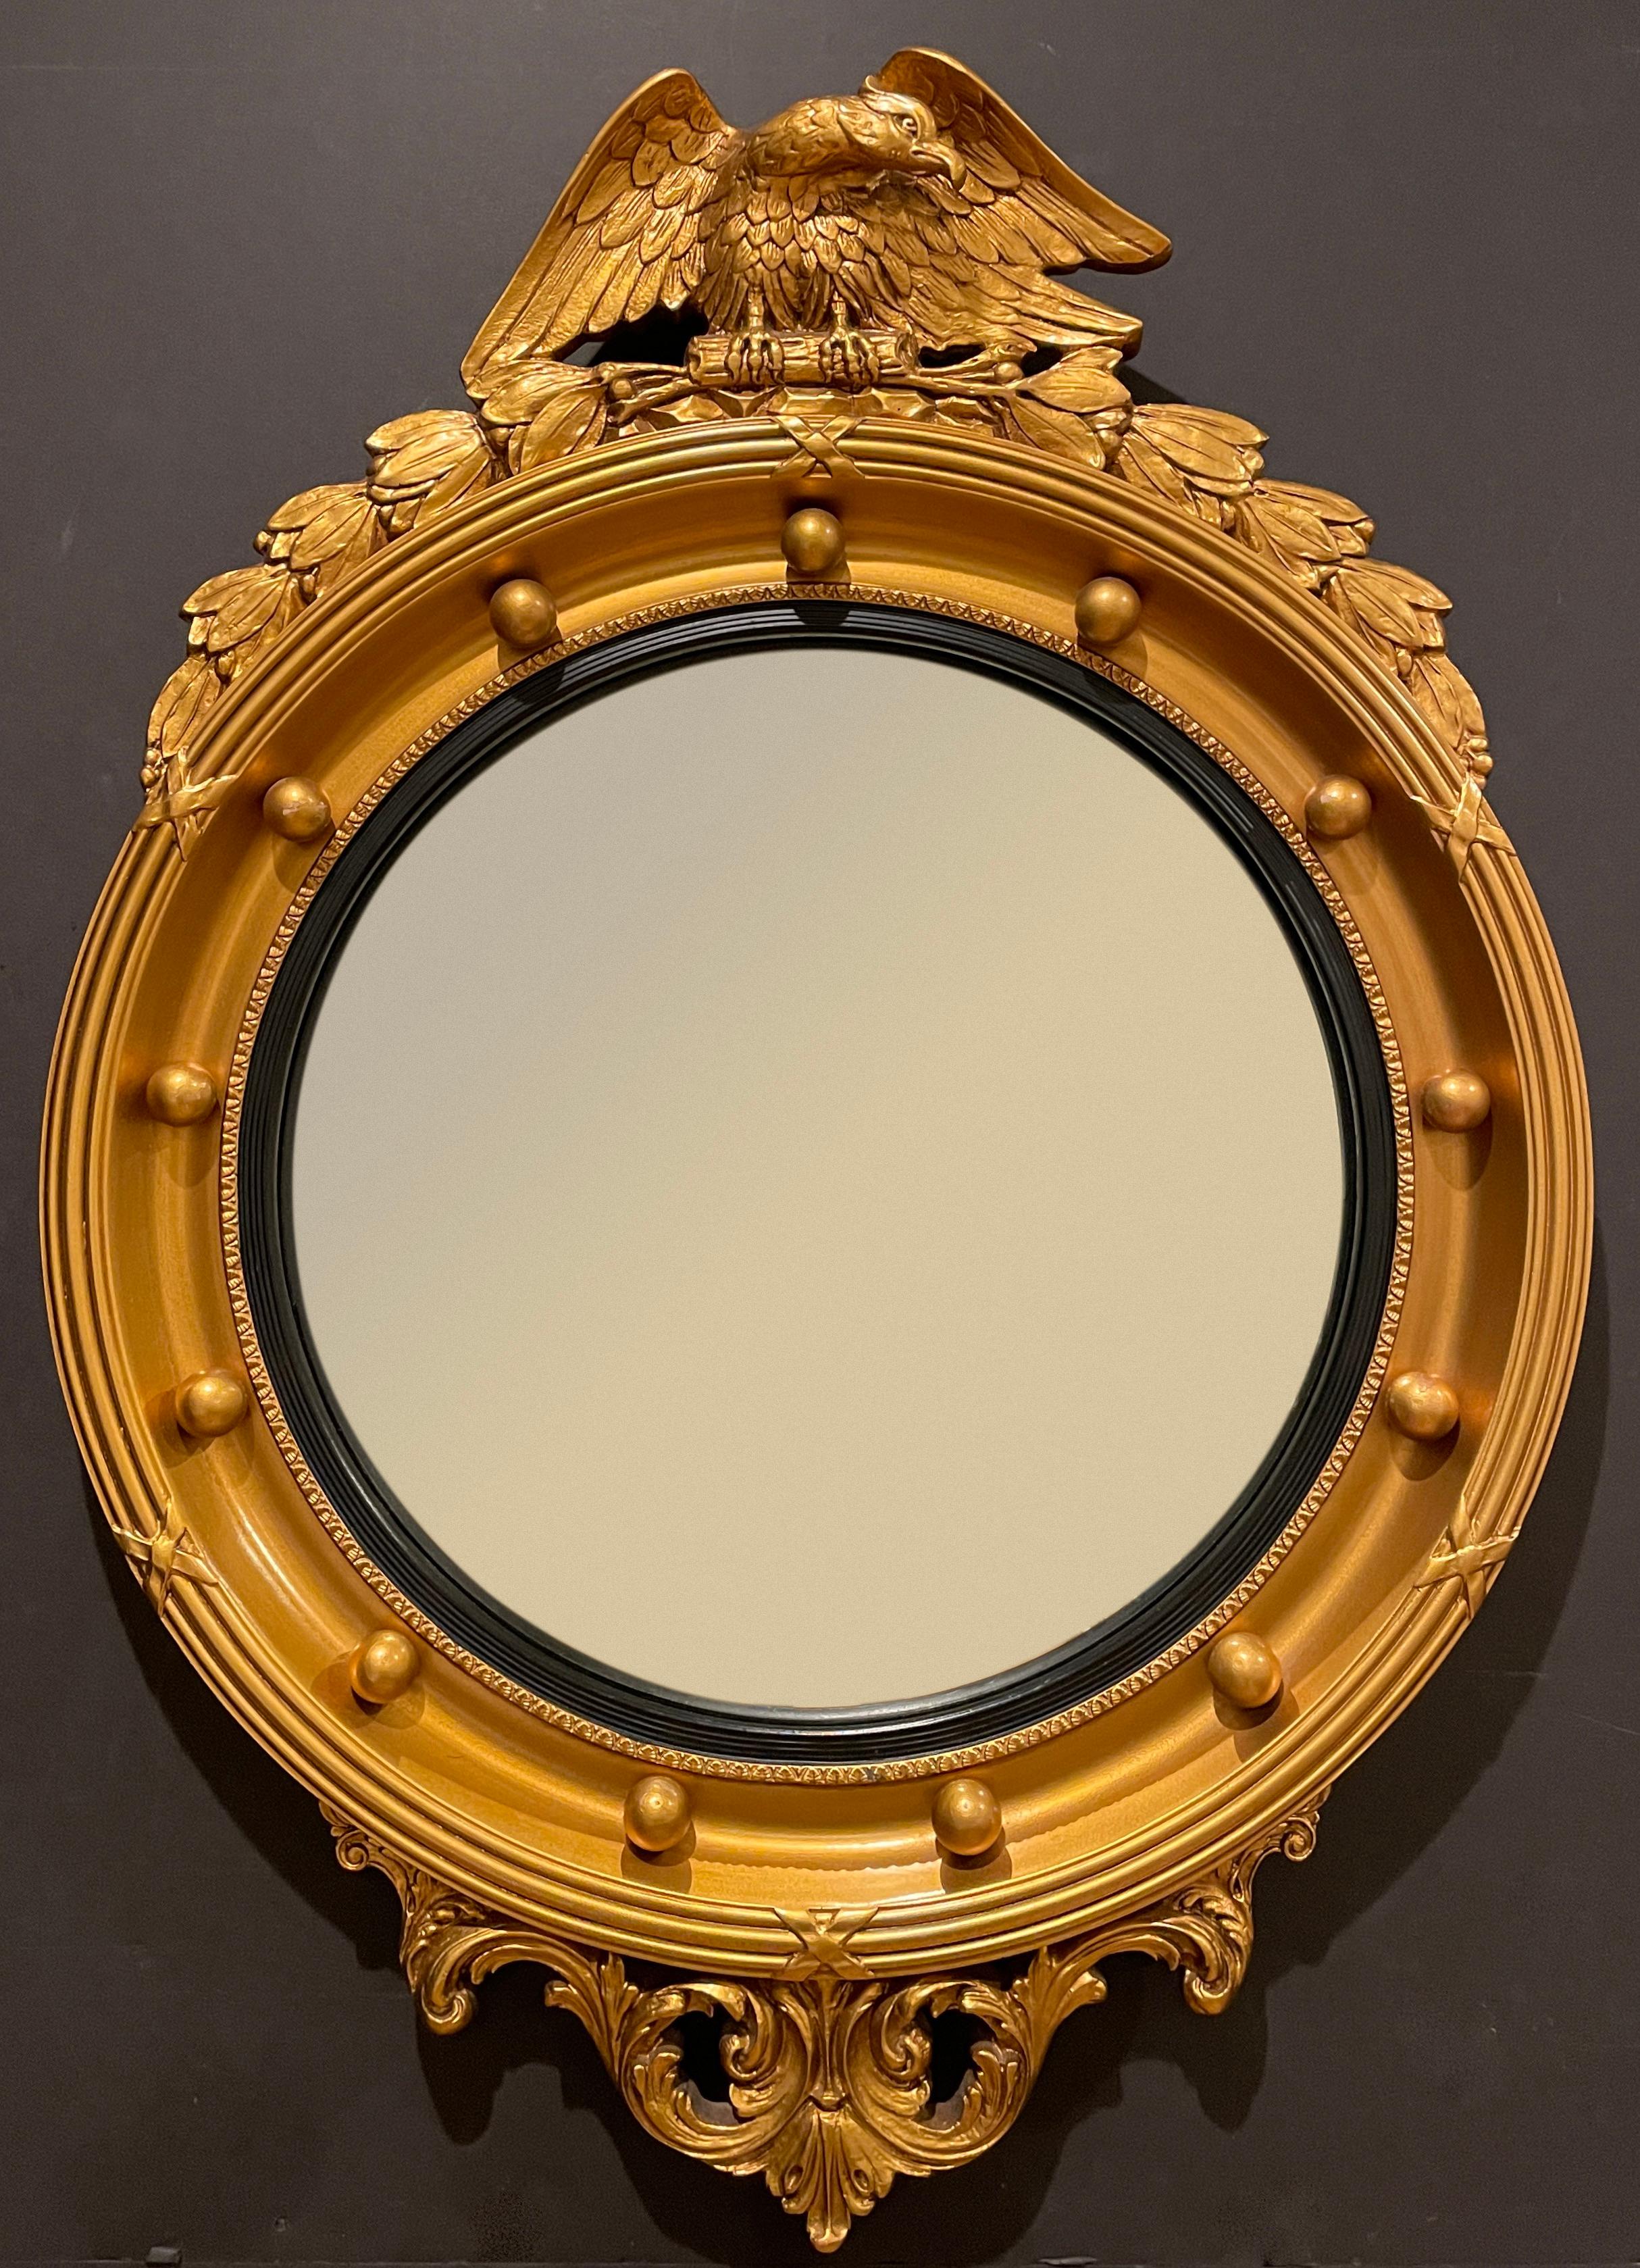 Nicely modelled gilt American Federal style convex mirror with eagle at crest. Ball design and reeded black molding separating glass from frame.